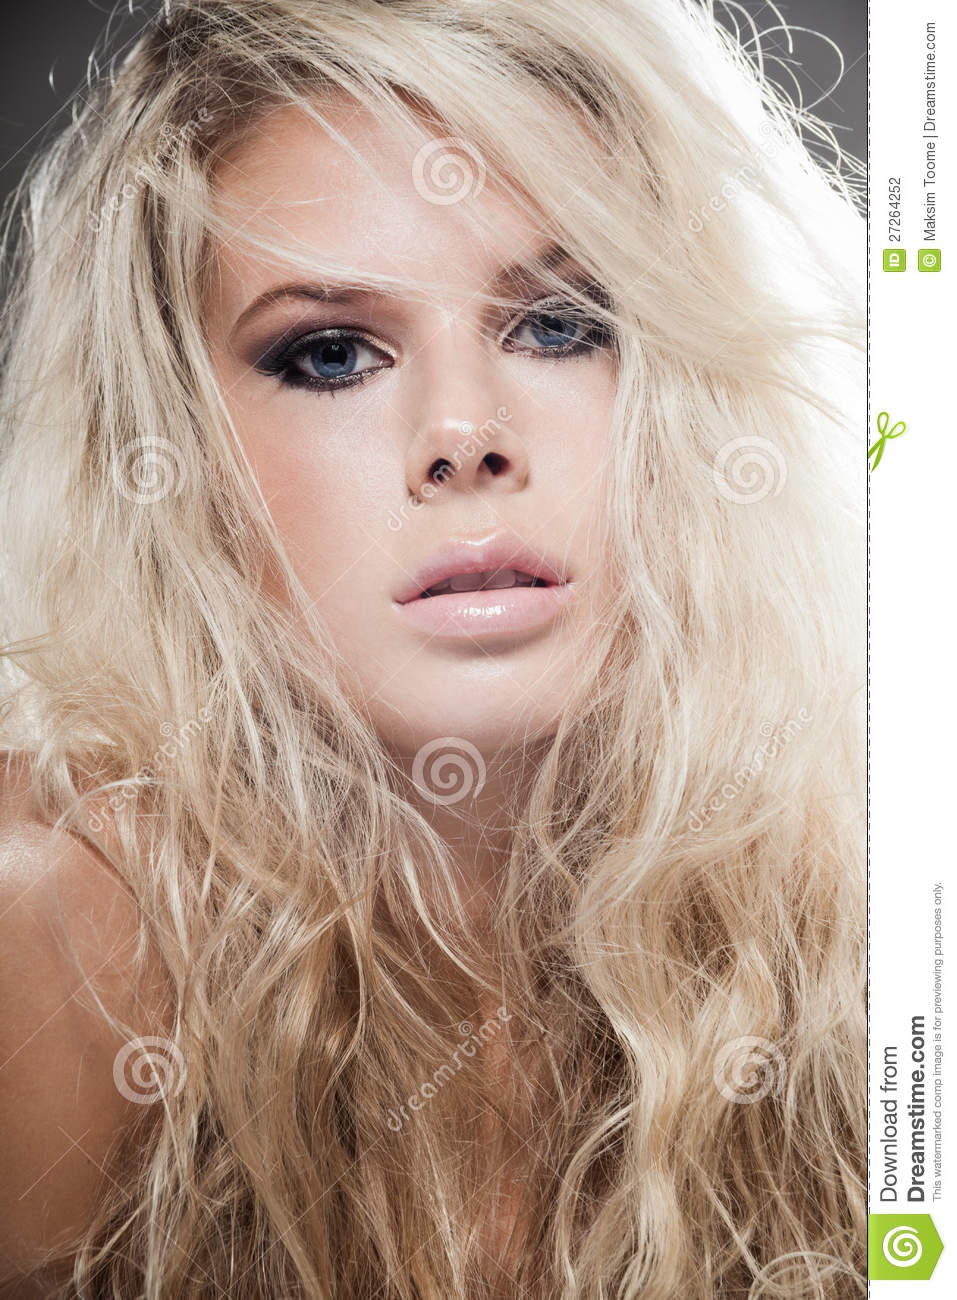 Tangled Hair Stock Photography   Image  27264252